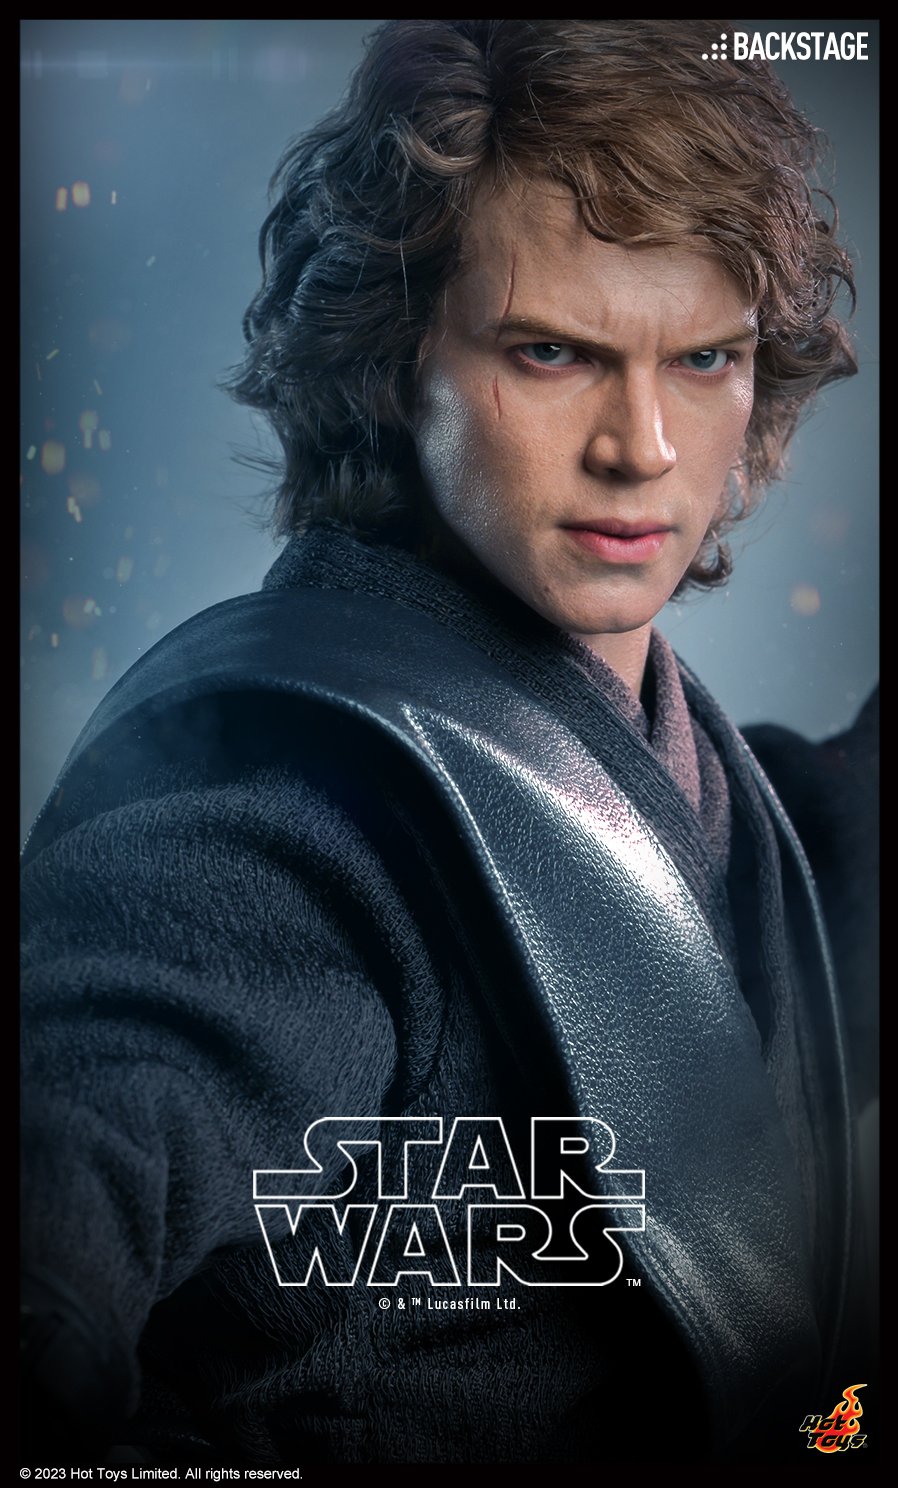 newproduct - NEW PRODUCT: HOT TOYS: STAR WARS EPISODE III: REVENGE OF THE SITH™ ANAKIN SKYWALKER™ 1/6TH SCALE COLLECTIBLE FIGURE - Page 7 Hot-Toys-ROTS-Anakin-Preview-2